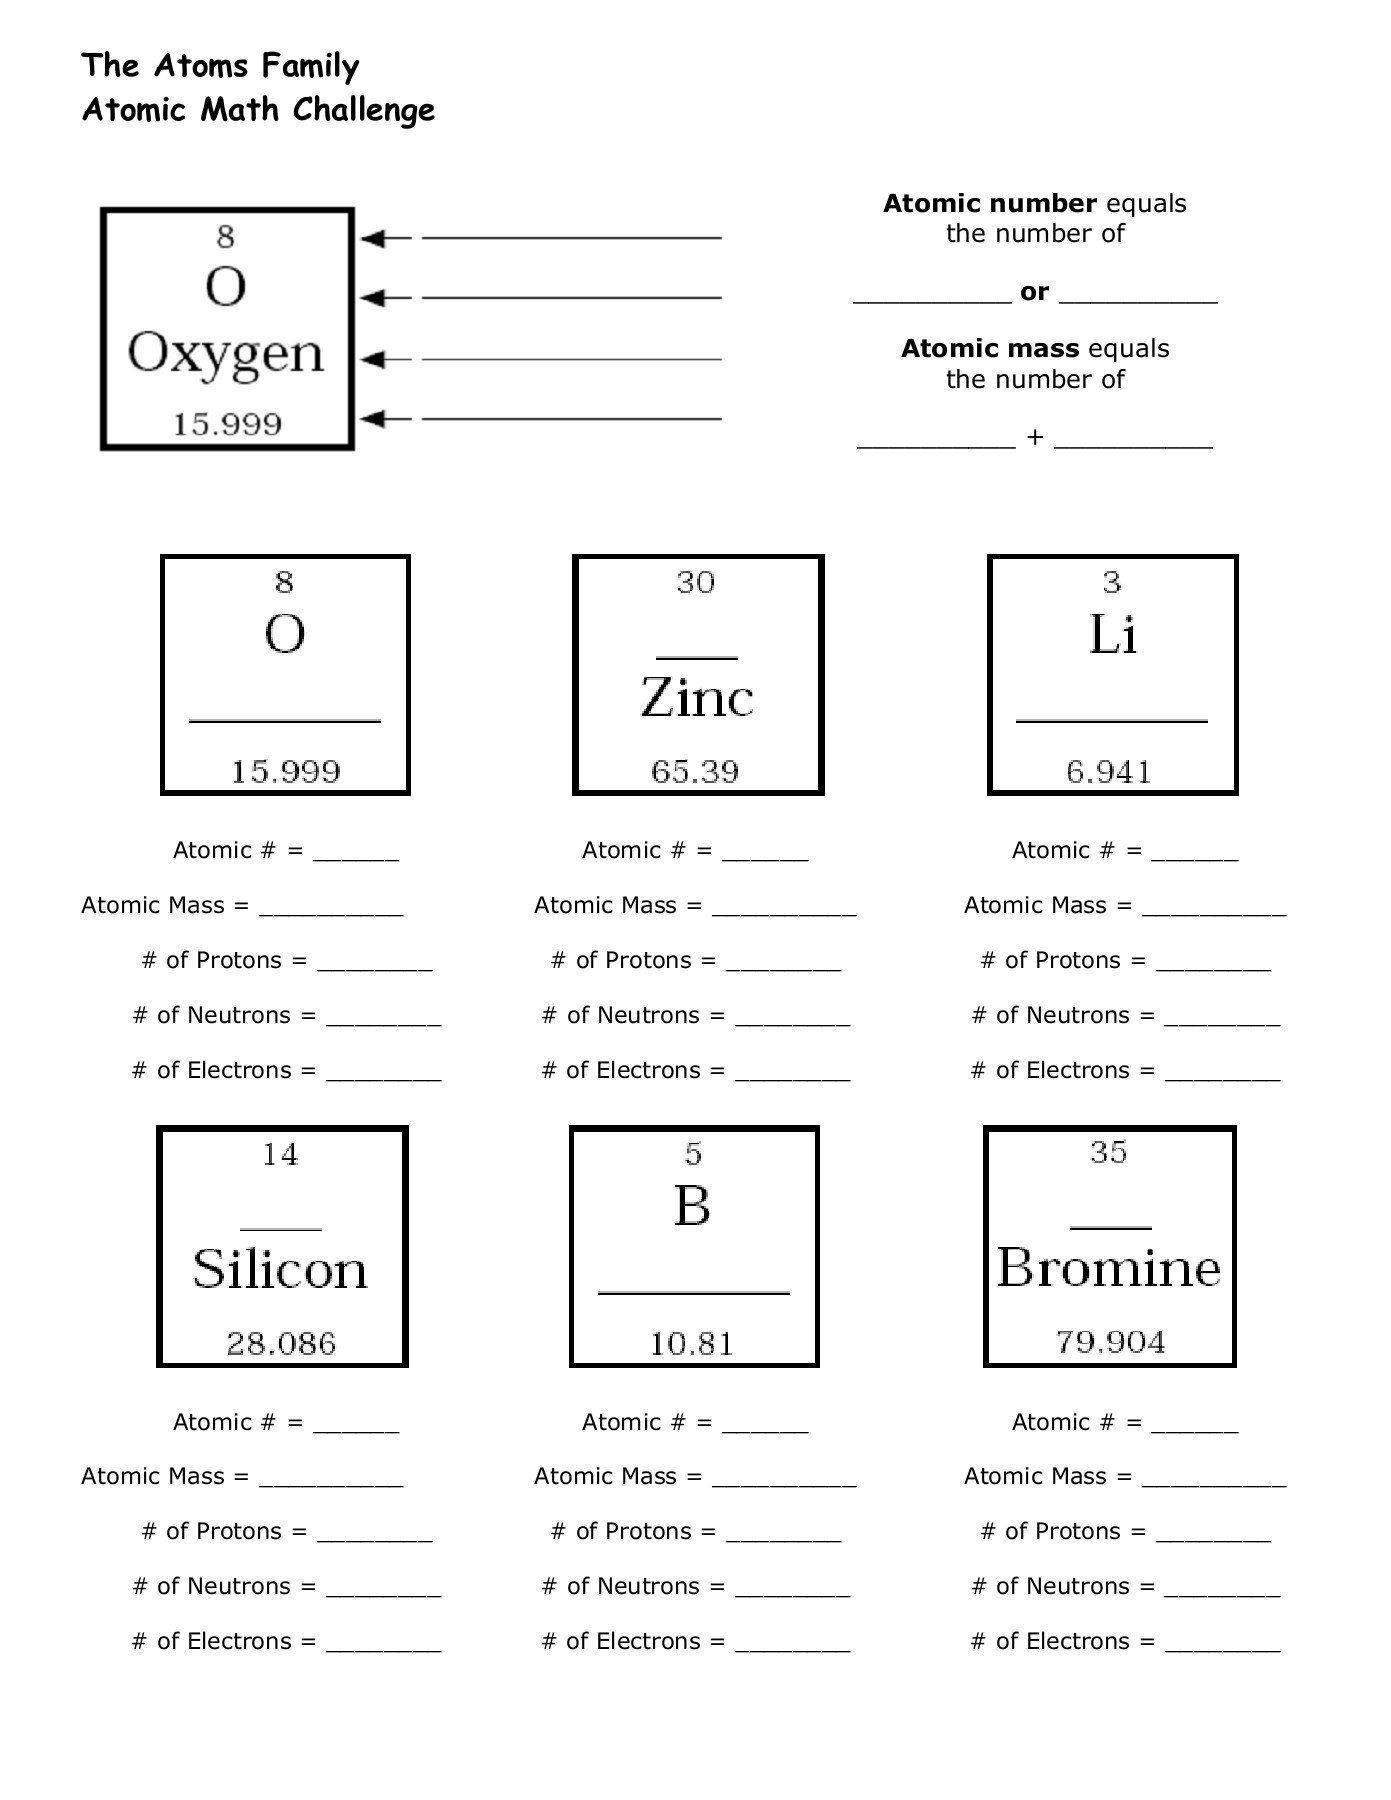 Structure Of the atom Worksheet Pin On Structure atoms Family Worksheets